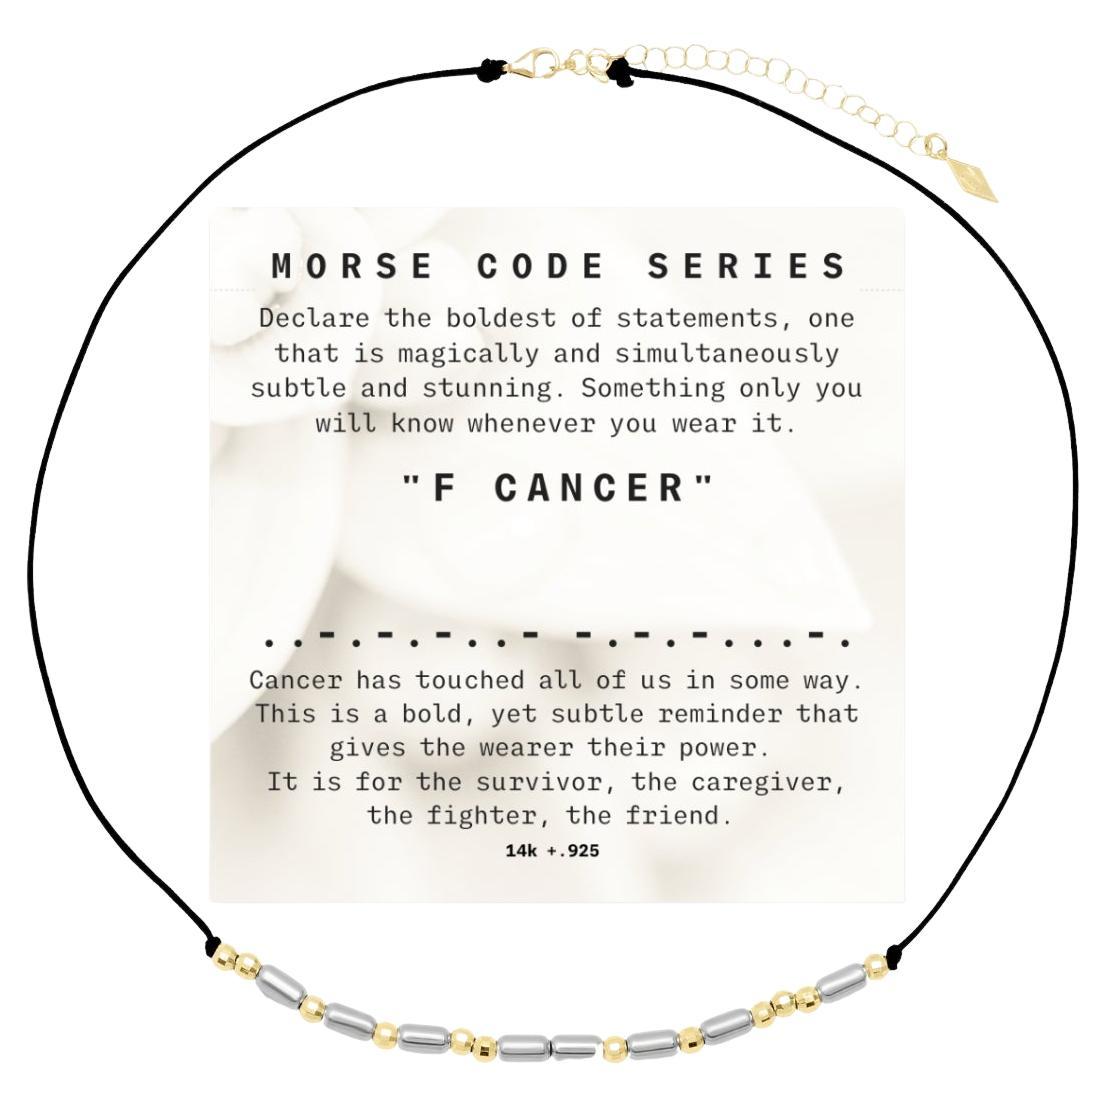 14K+.925 "Morse Code" Series F CANCER Choker/Necklace on Adjustable Macrame Cord For Sale